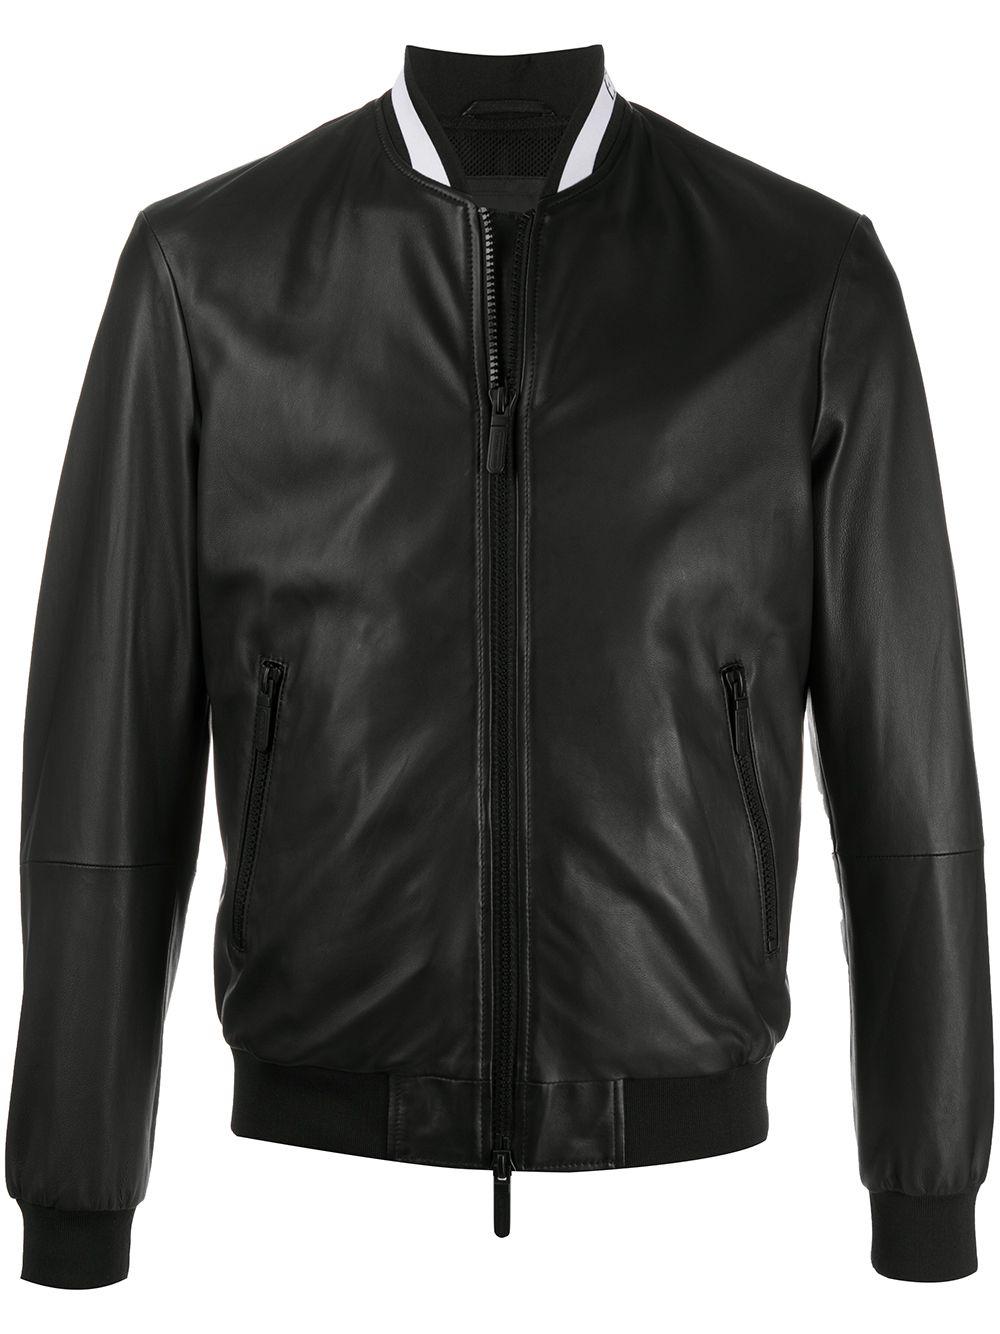 Emporio Armani Leather Jacket in Black for Men Lyst